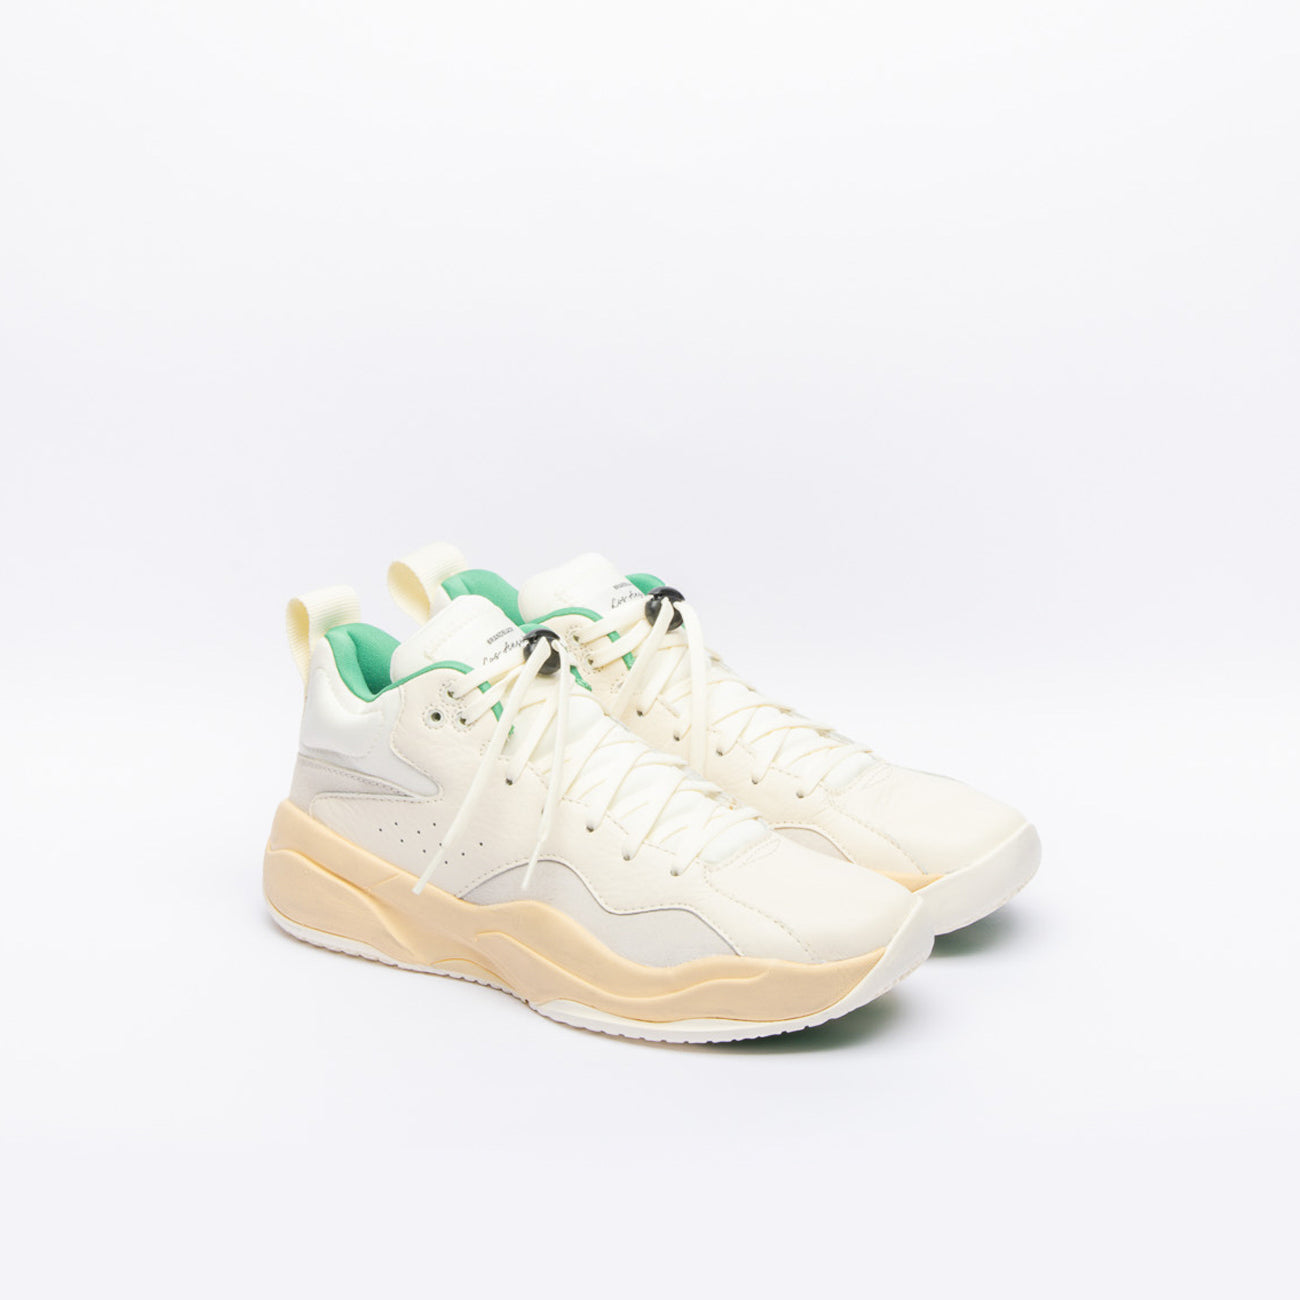 Mid-top basket sneaker Brandblack Villain Dirty M779BB in cream leather and suede